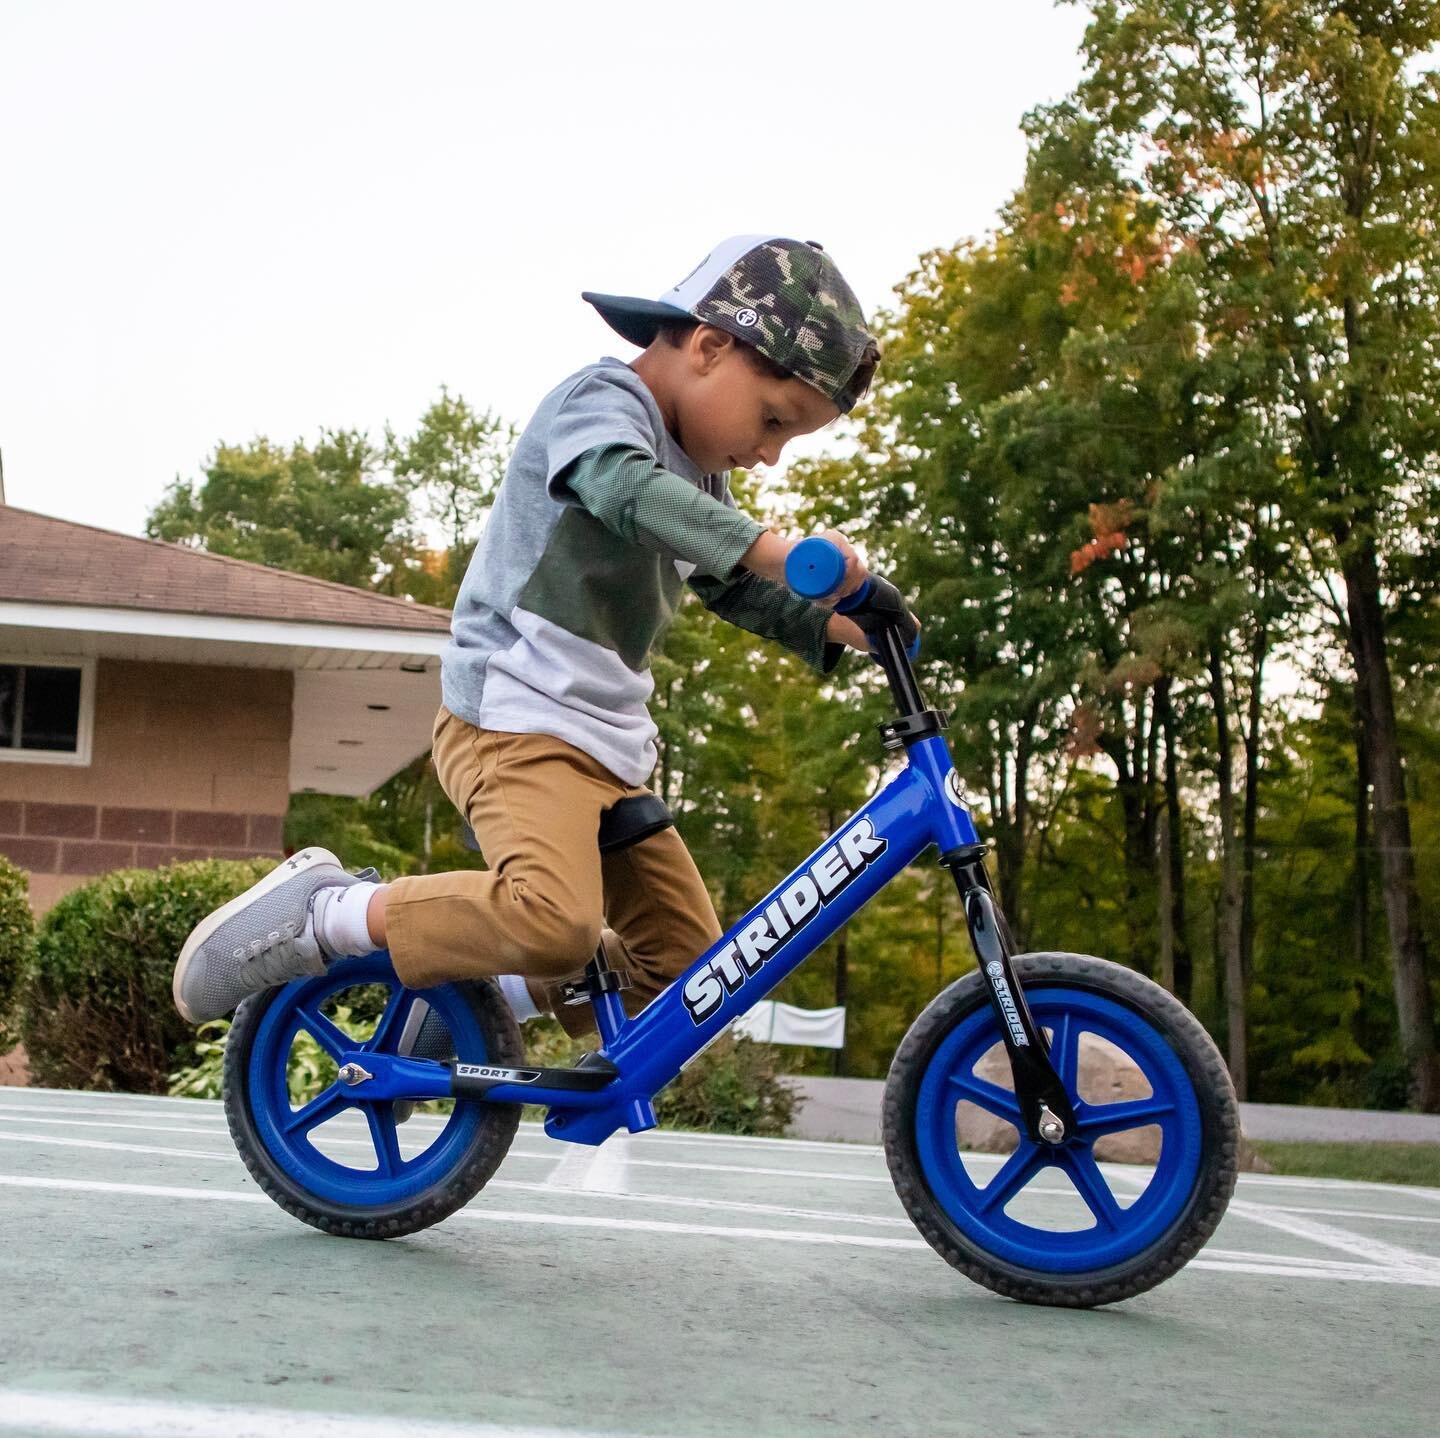 One of the best things about deciding to go full time into RV living is watching Kade grow, learn, and experience new things everyday.

Earlier this month we surprised Kade with a new @striderbikes balance bike.

We have quickly realized we have a li